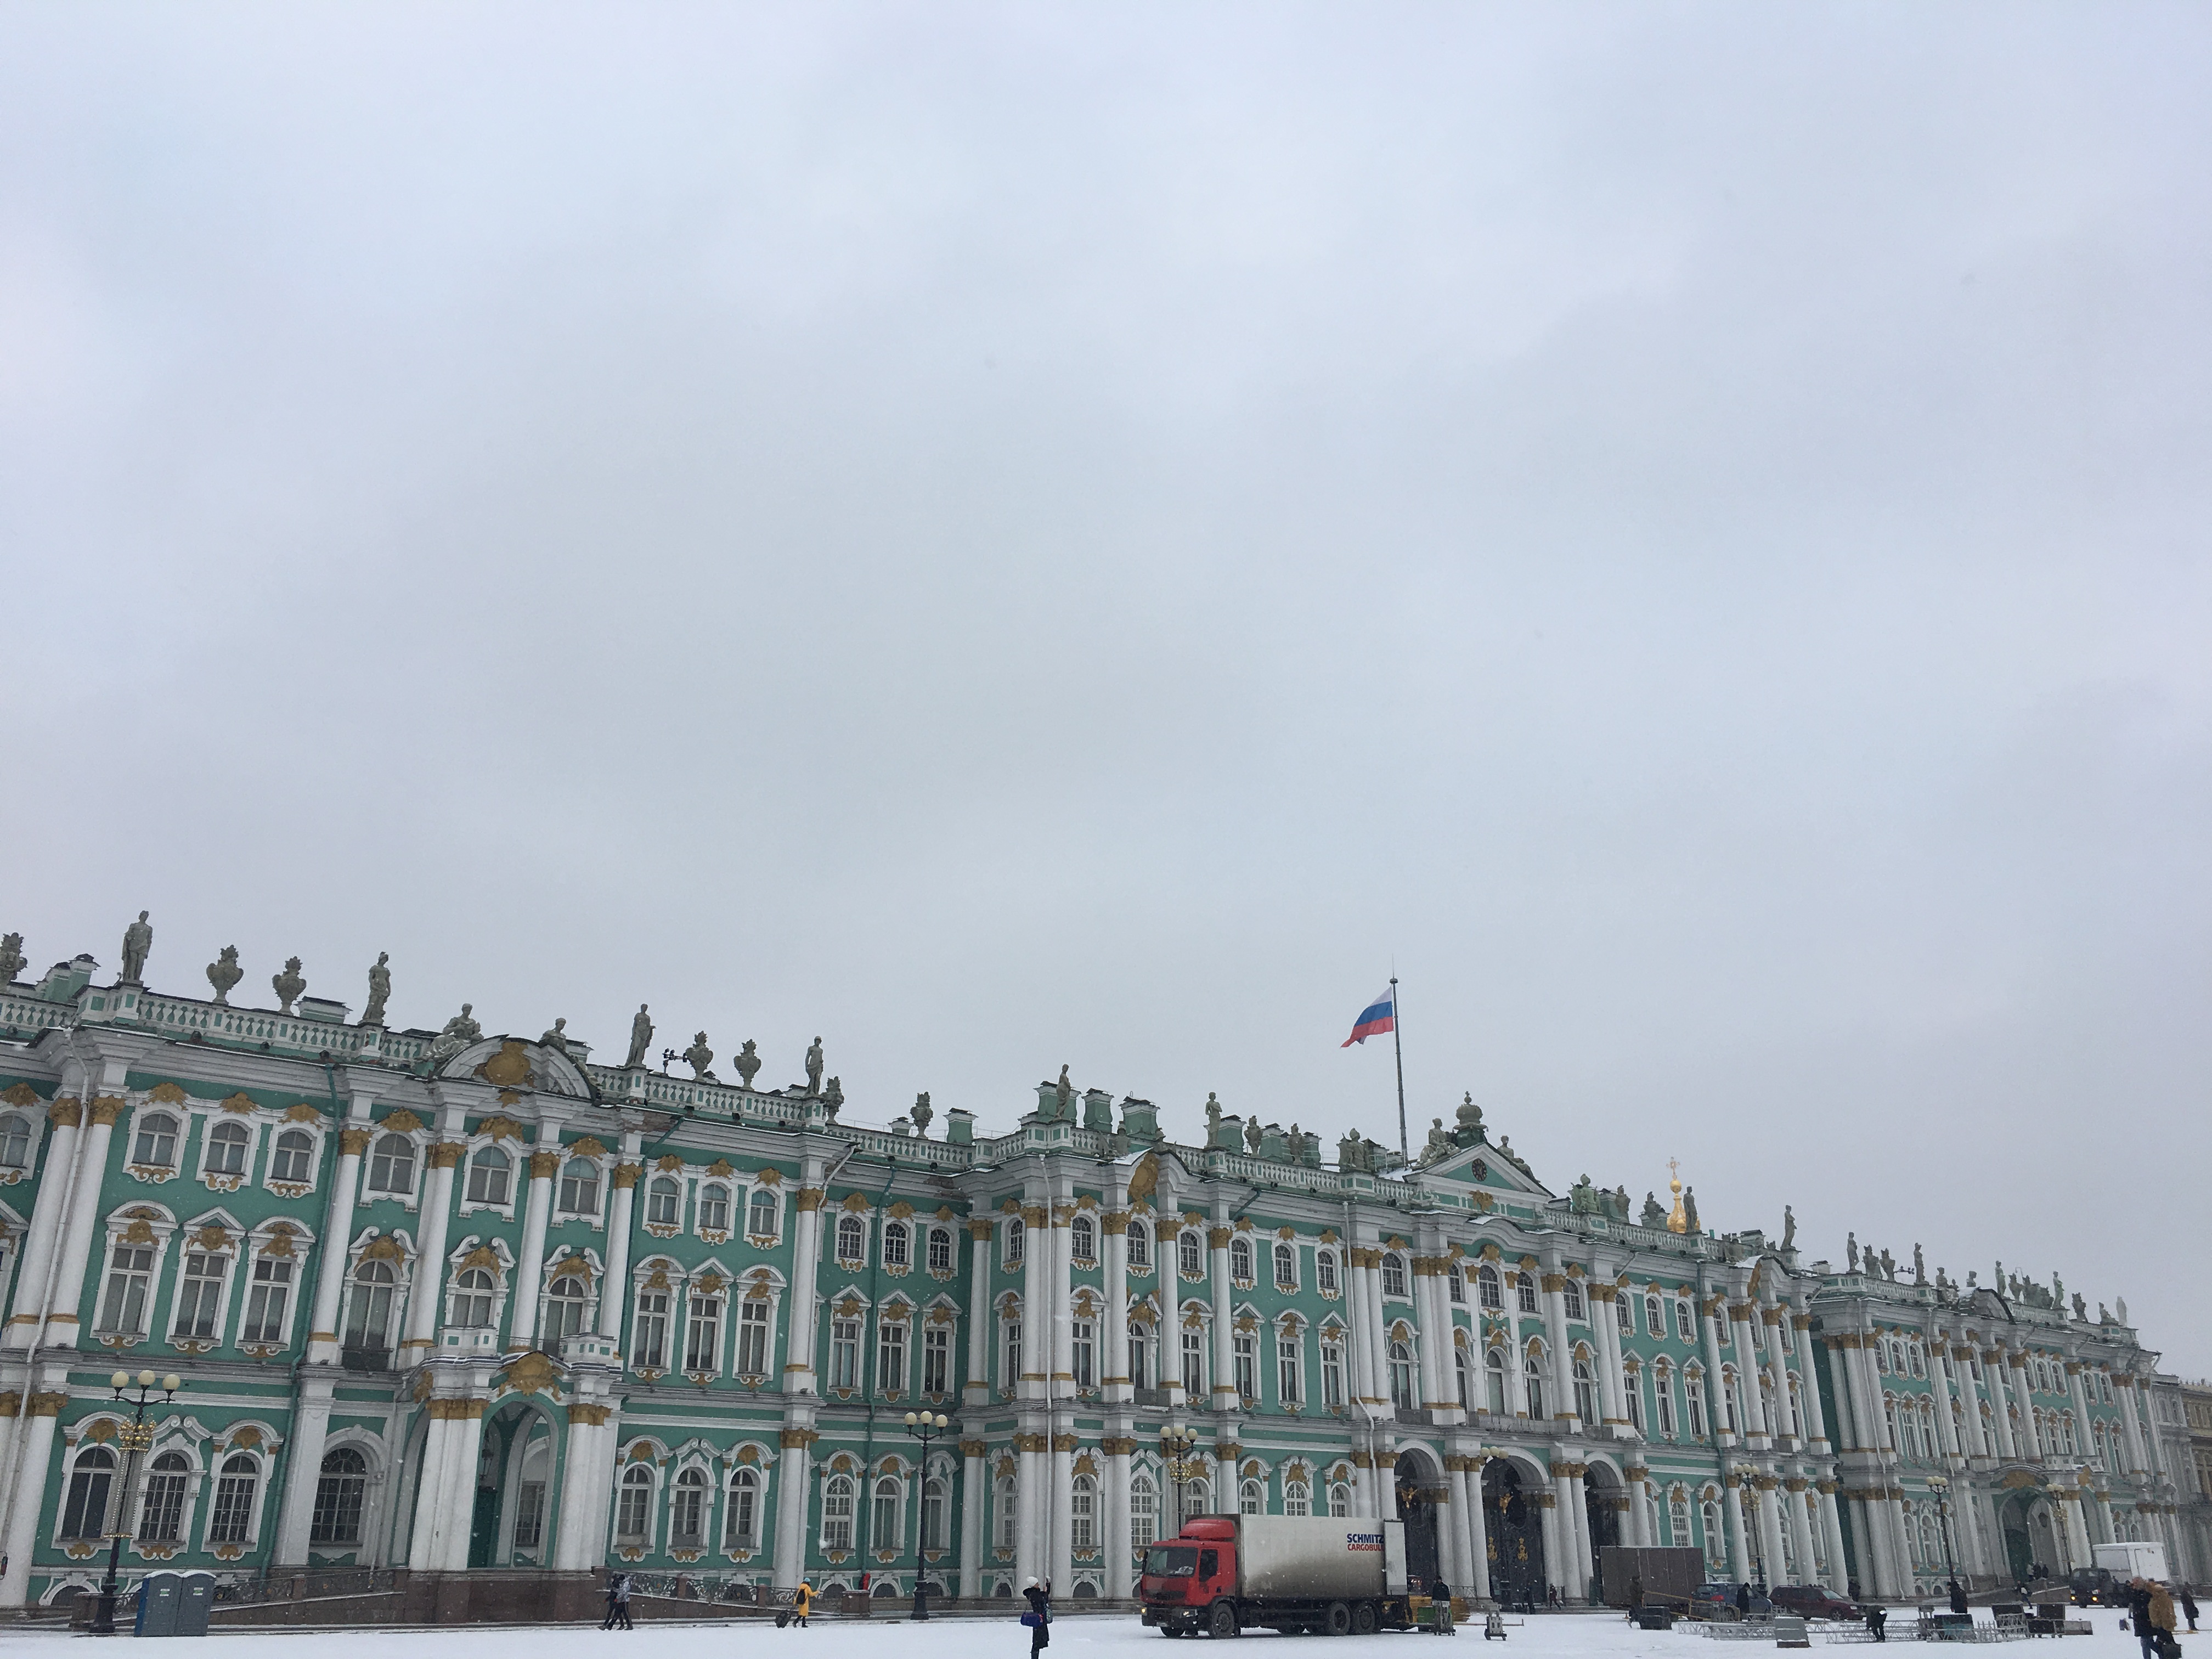 The Winter Palace, a landmark in St. Petersburg 